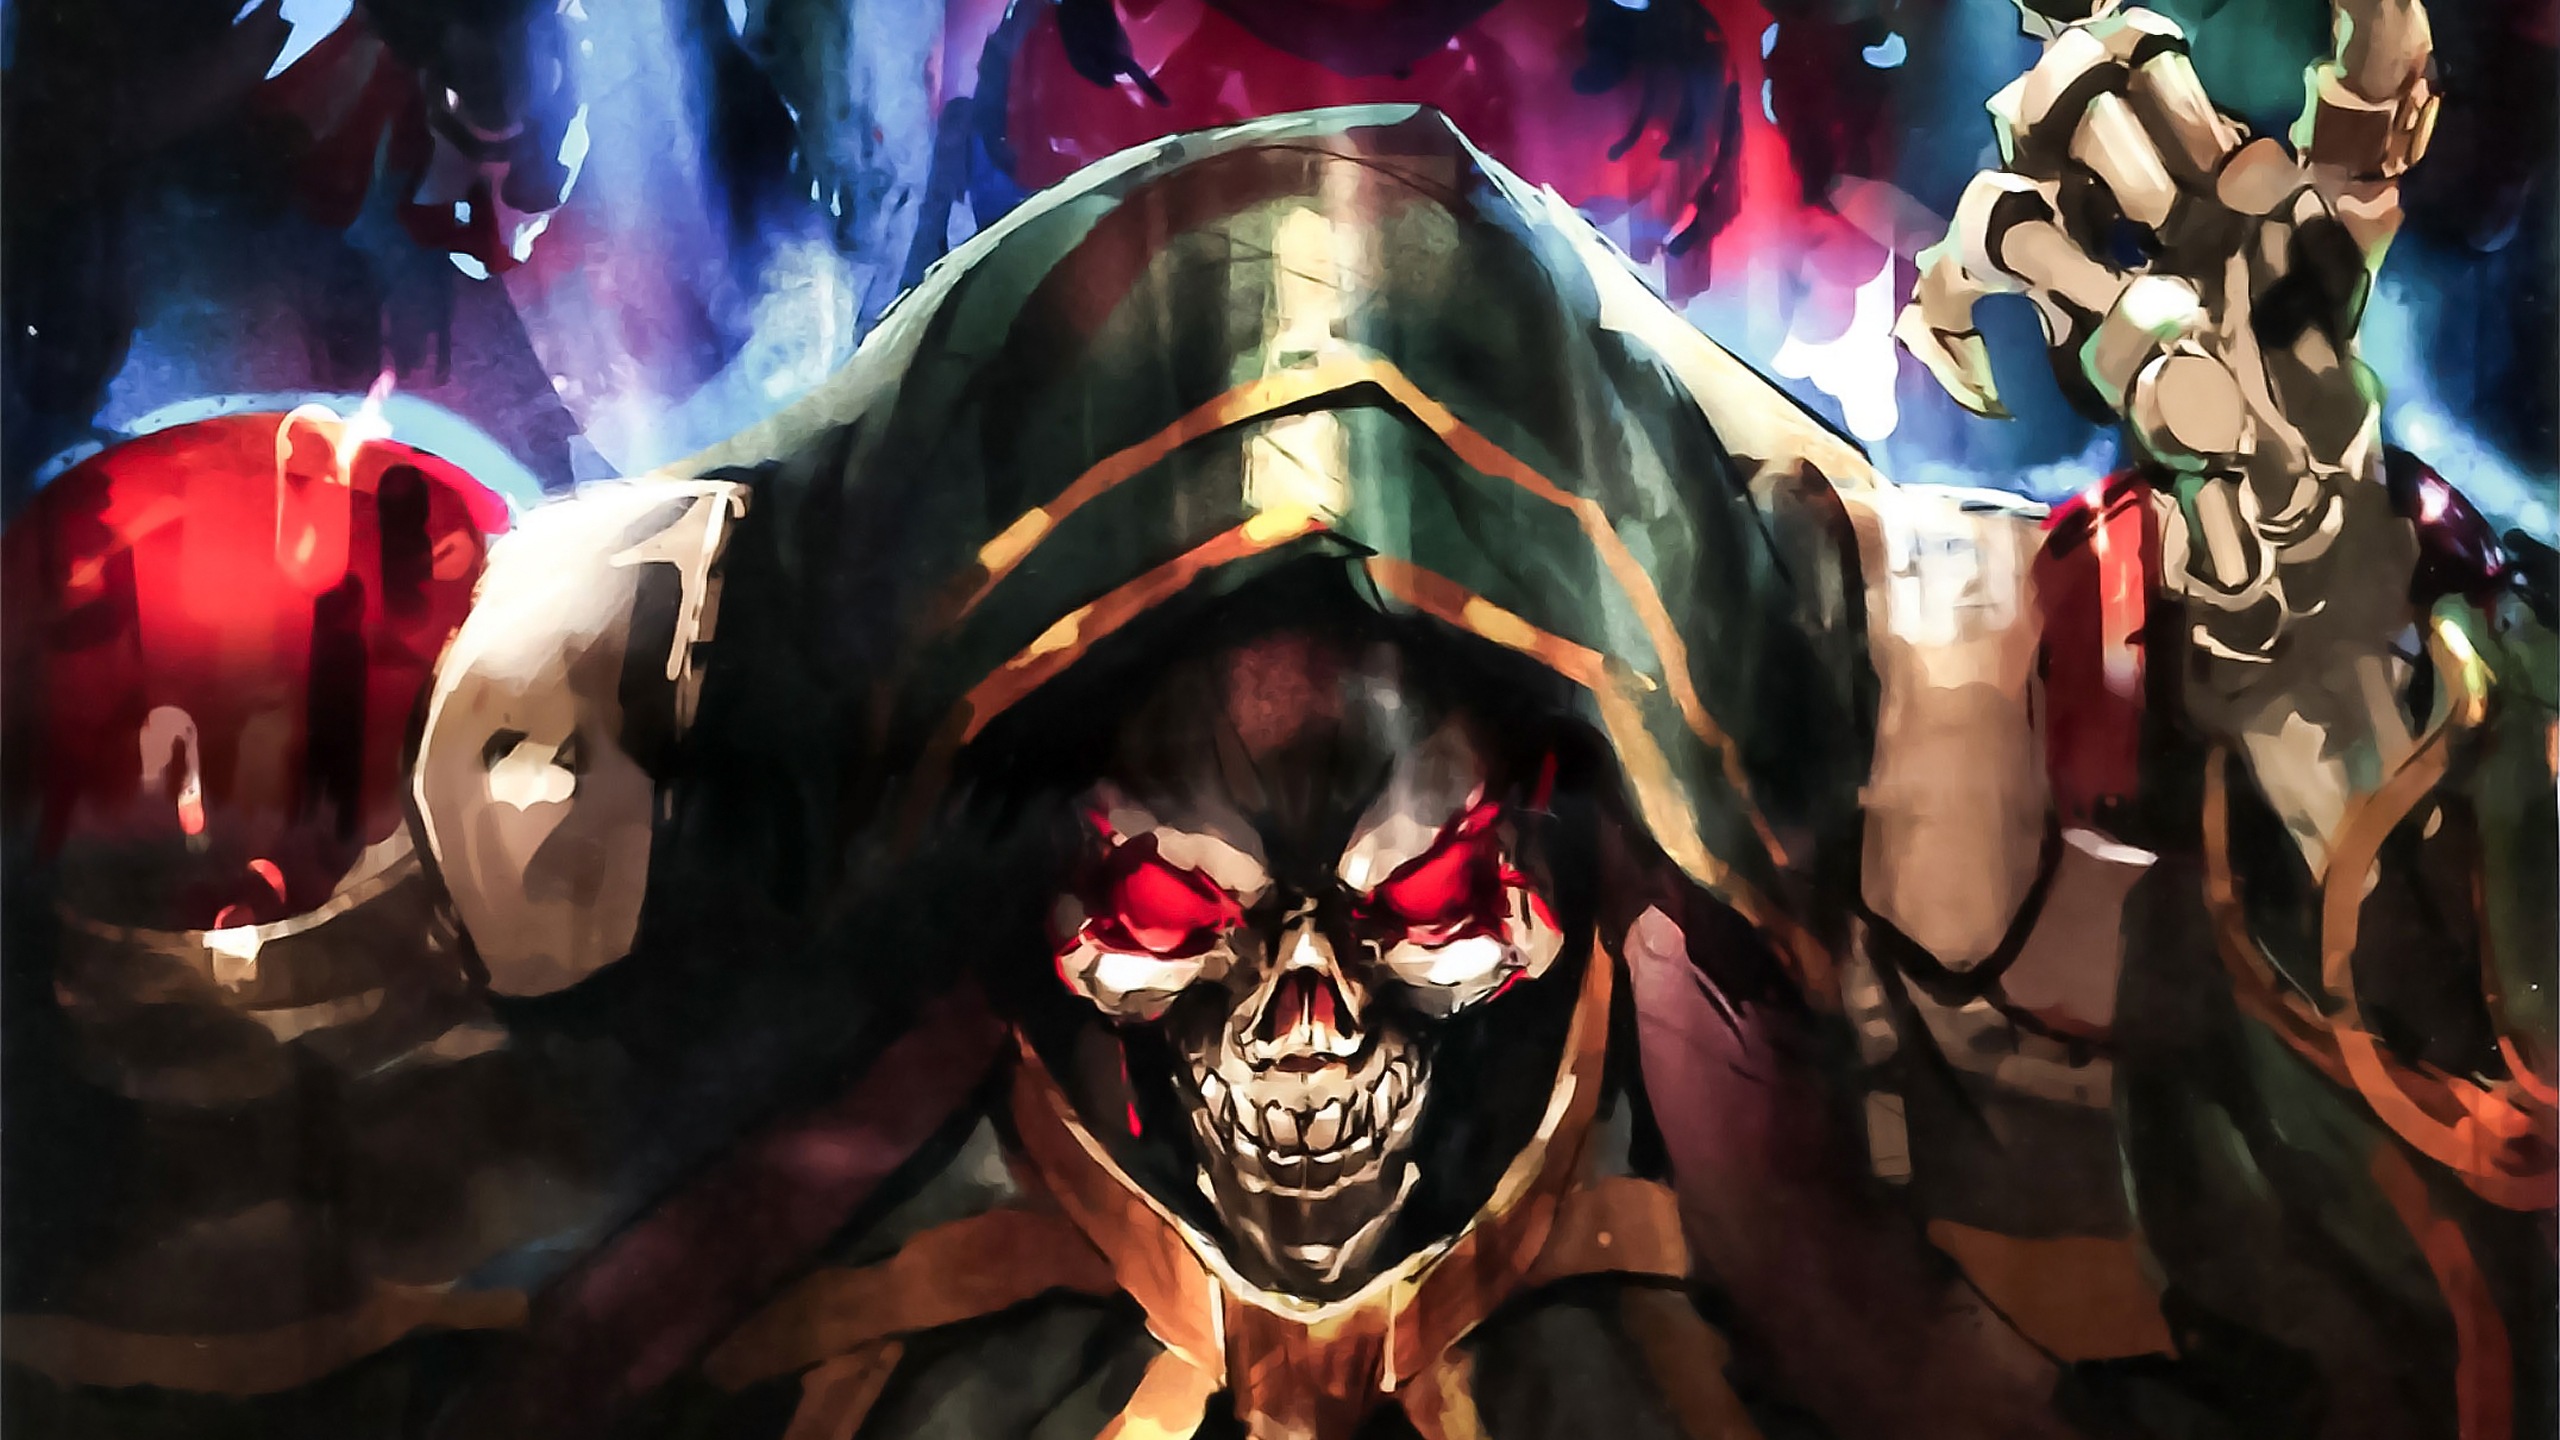 Overlord #15